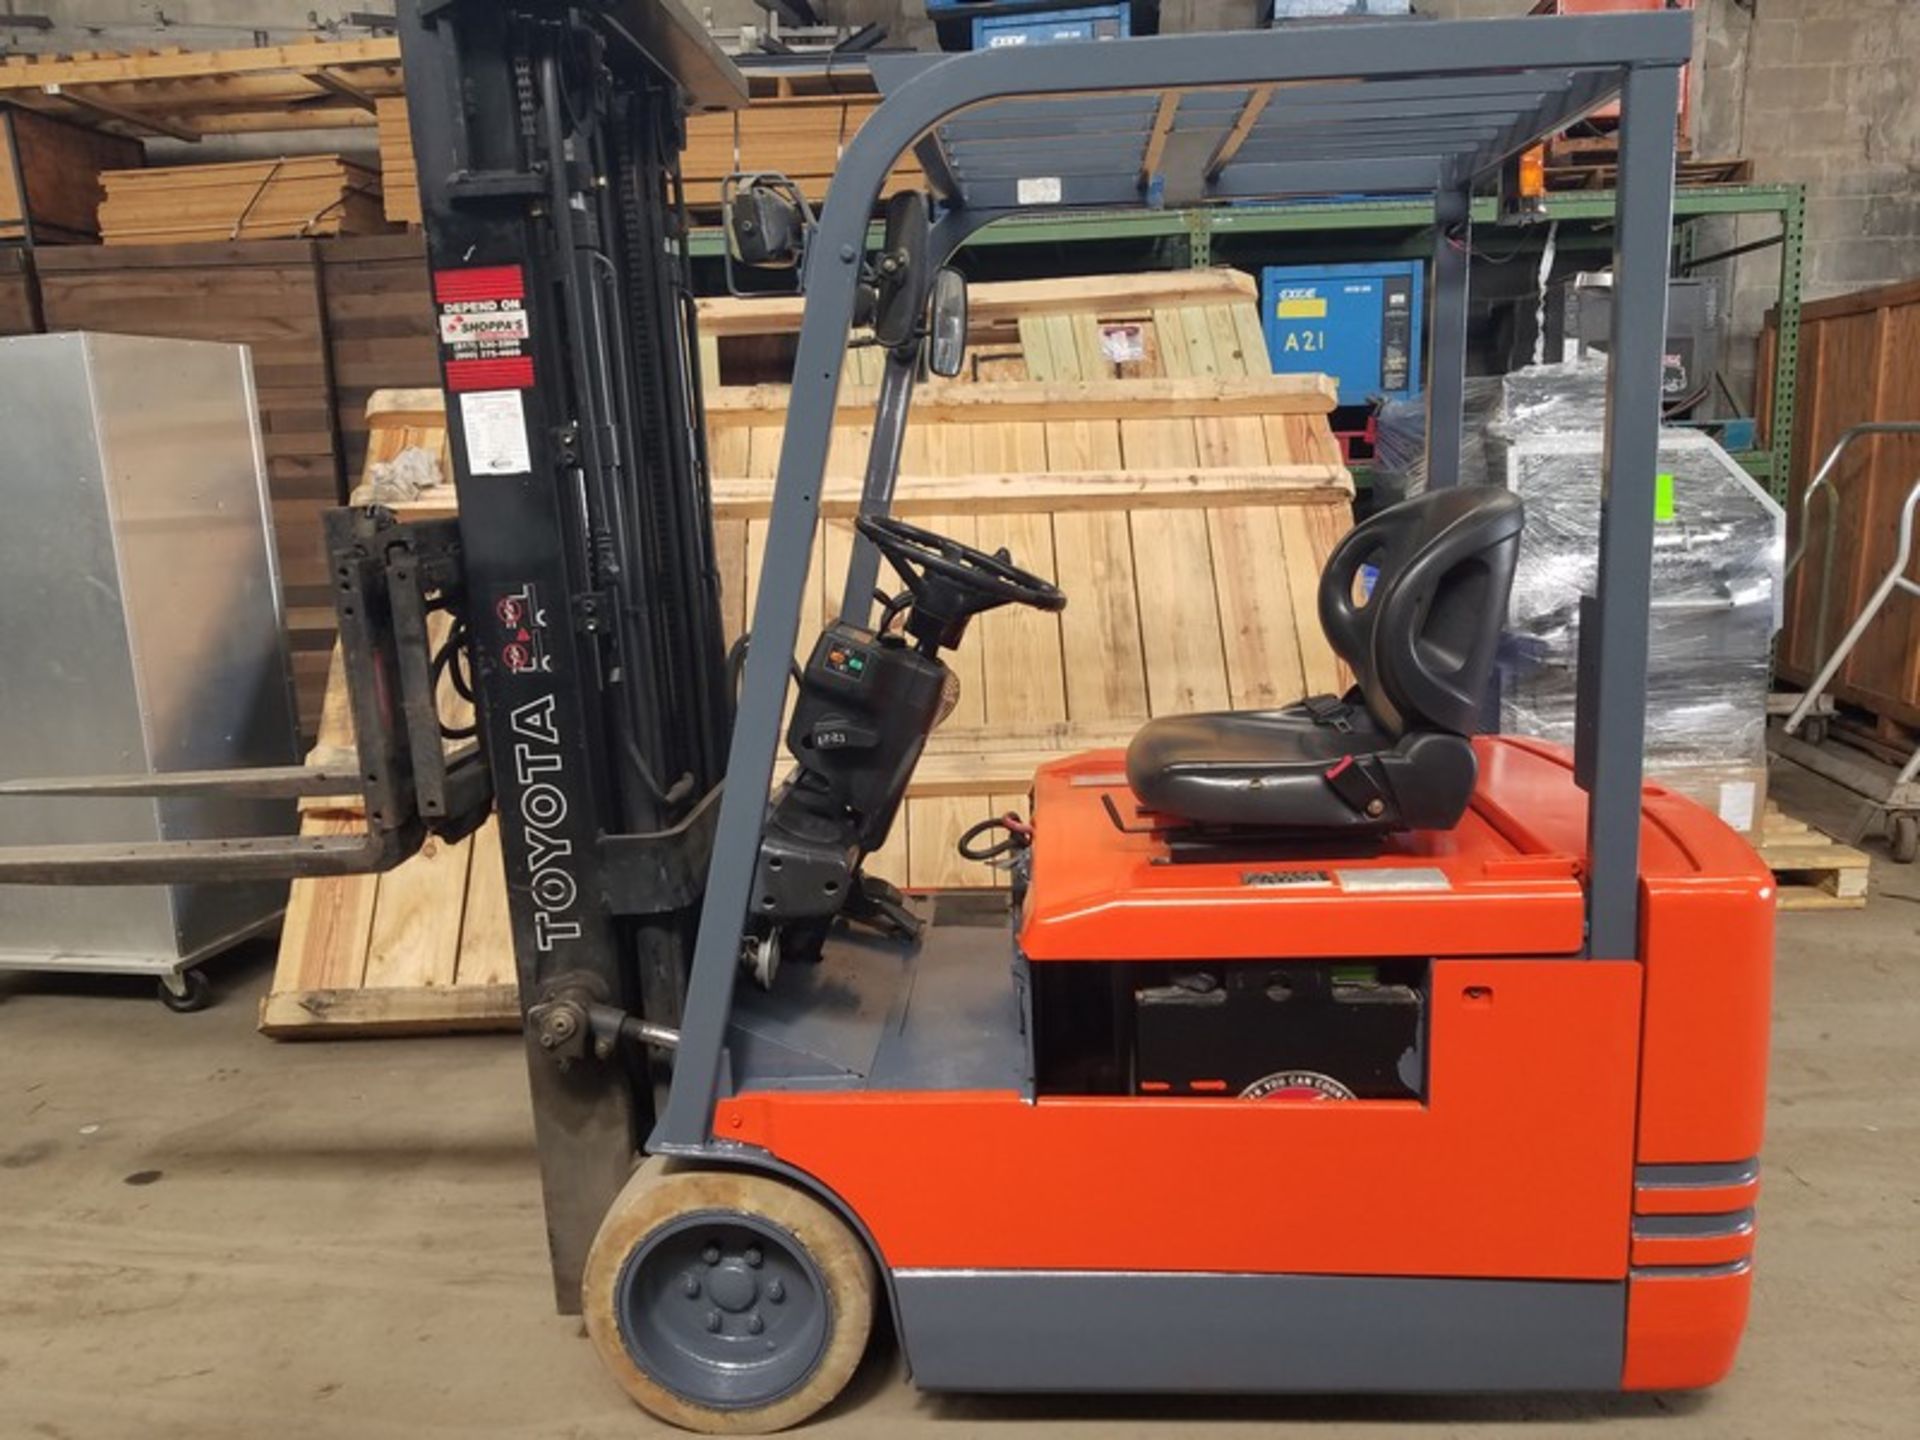 Toyota 3-Wheel Electric Forklift, Model 5FBE18, S/N 13878 with 36-Volt, 185" Mast Height, Side